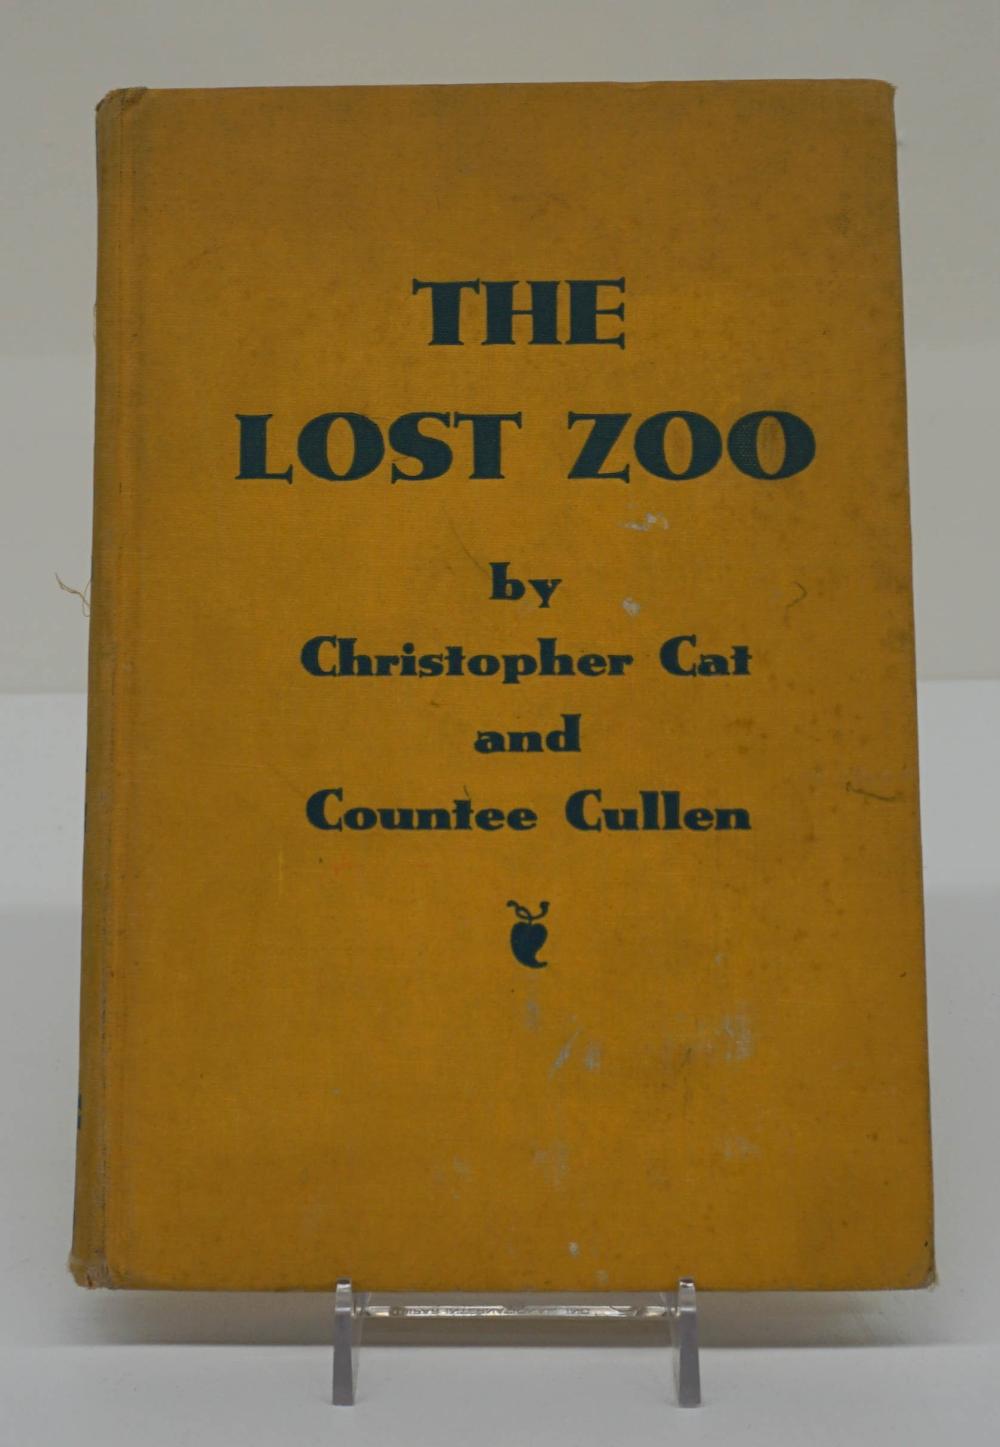 CHRISTOPHER CAT AND COUNTEE CULLEN